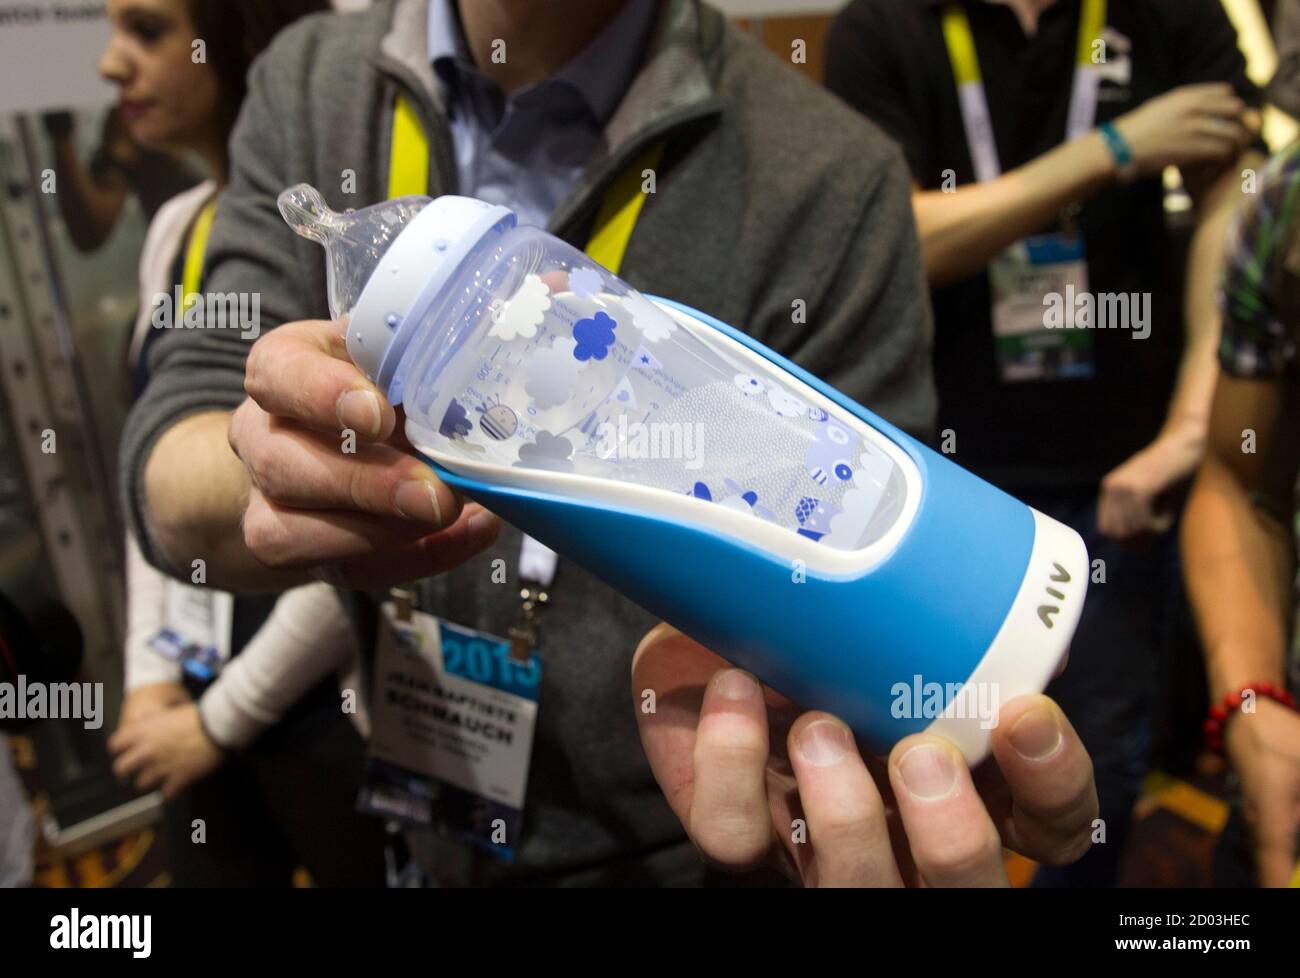 A baby bottle with a GlGl bottle holder is displayed during the 2015 International Consumer Electronics Show (CES) in Las Vegas, Nevada January 4, 2015. The holder sends a variety of information to a parent's smart phone and can help reduce colic by finding the optimal feeding angle, a representative said. REUTERS/Steve Marcus (UNITED STATES - Tags: SCIENCE TECHNOLOGY BUSINESS) Stock Photo